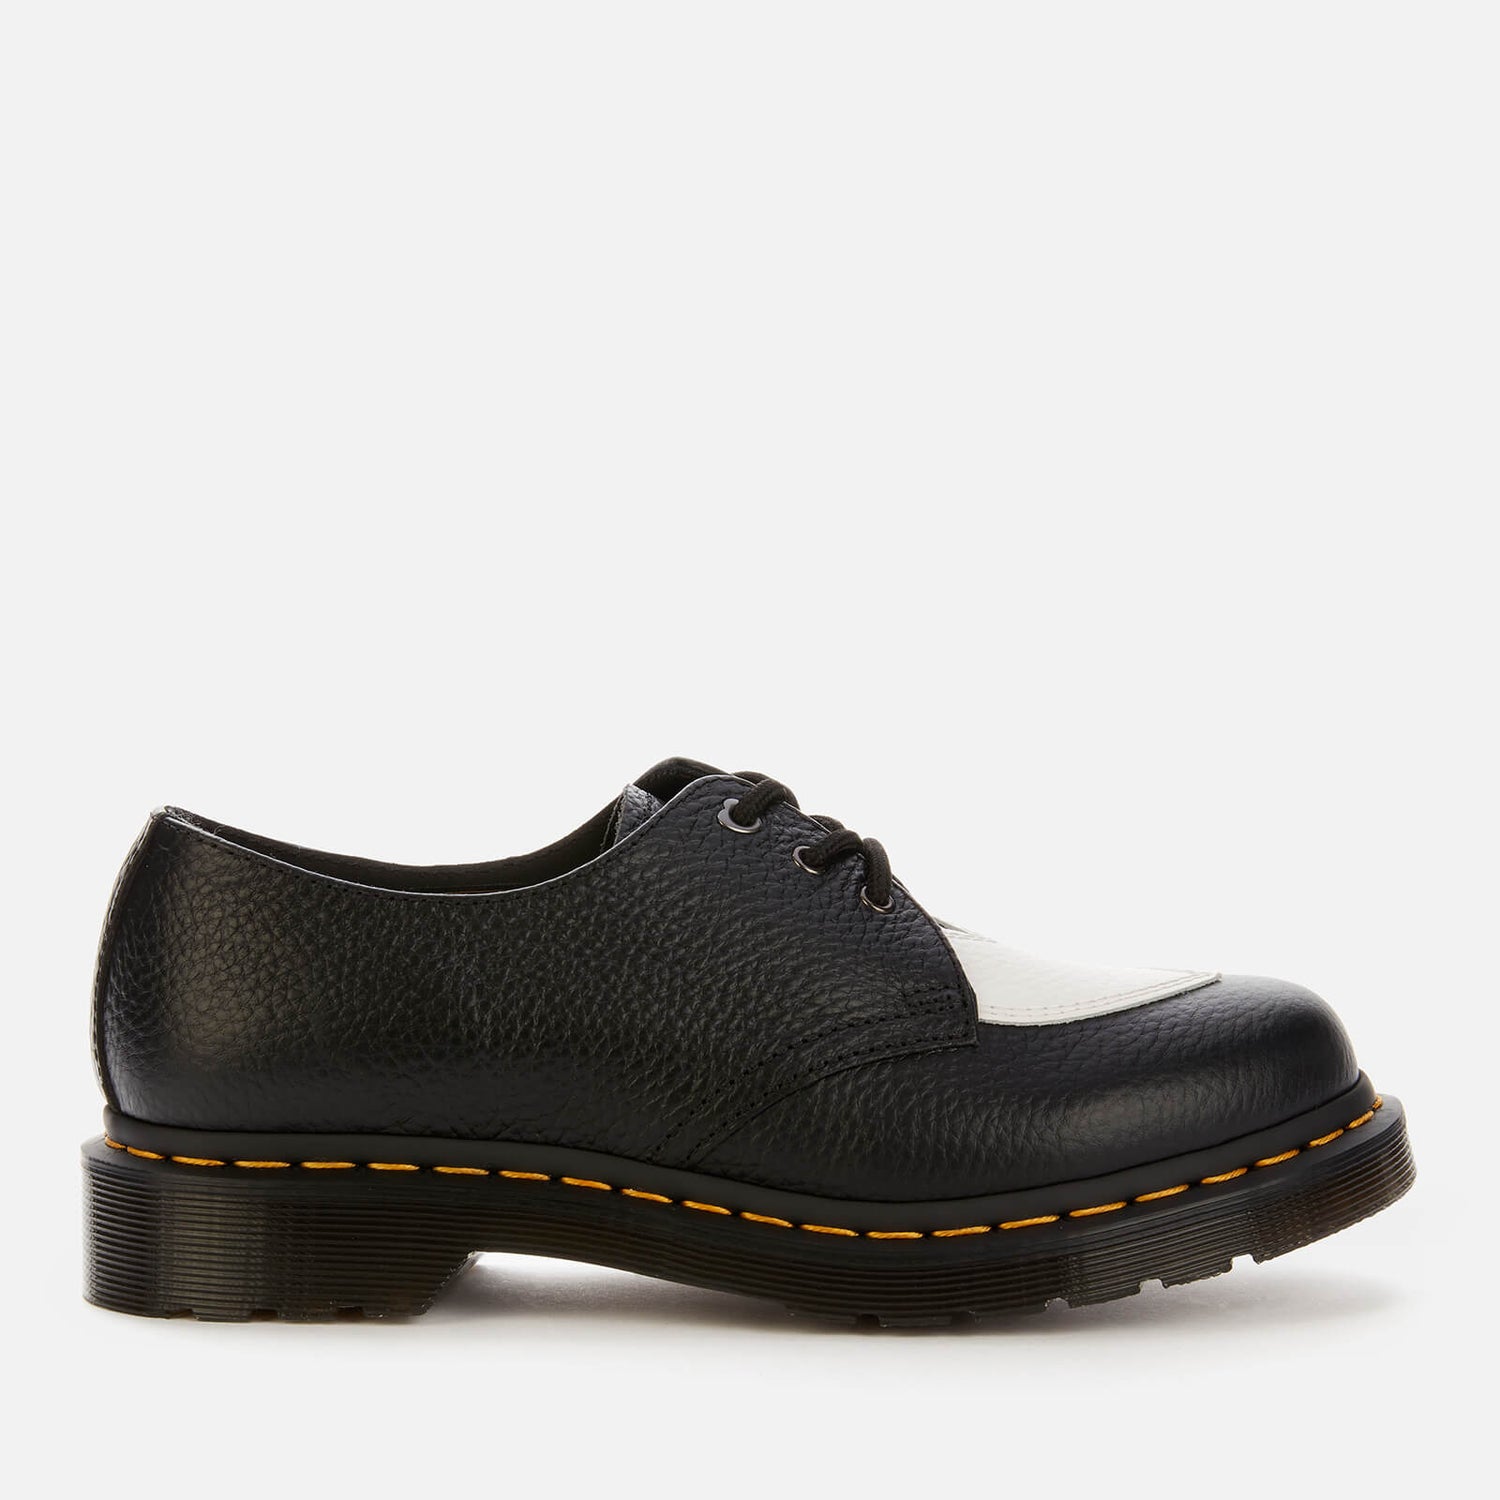 Dr. Martens Women's 1461 Amore Leather 3-Eye Shoes - Black/White